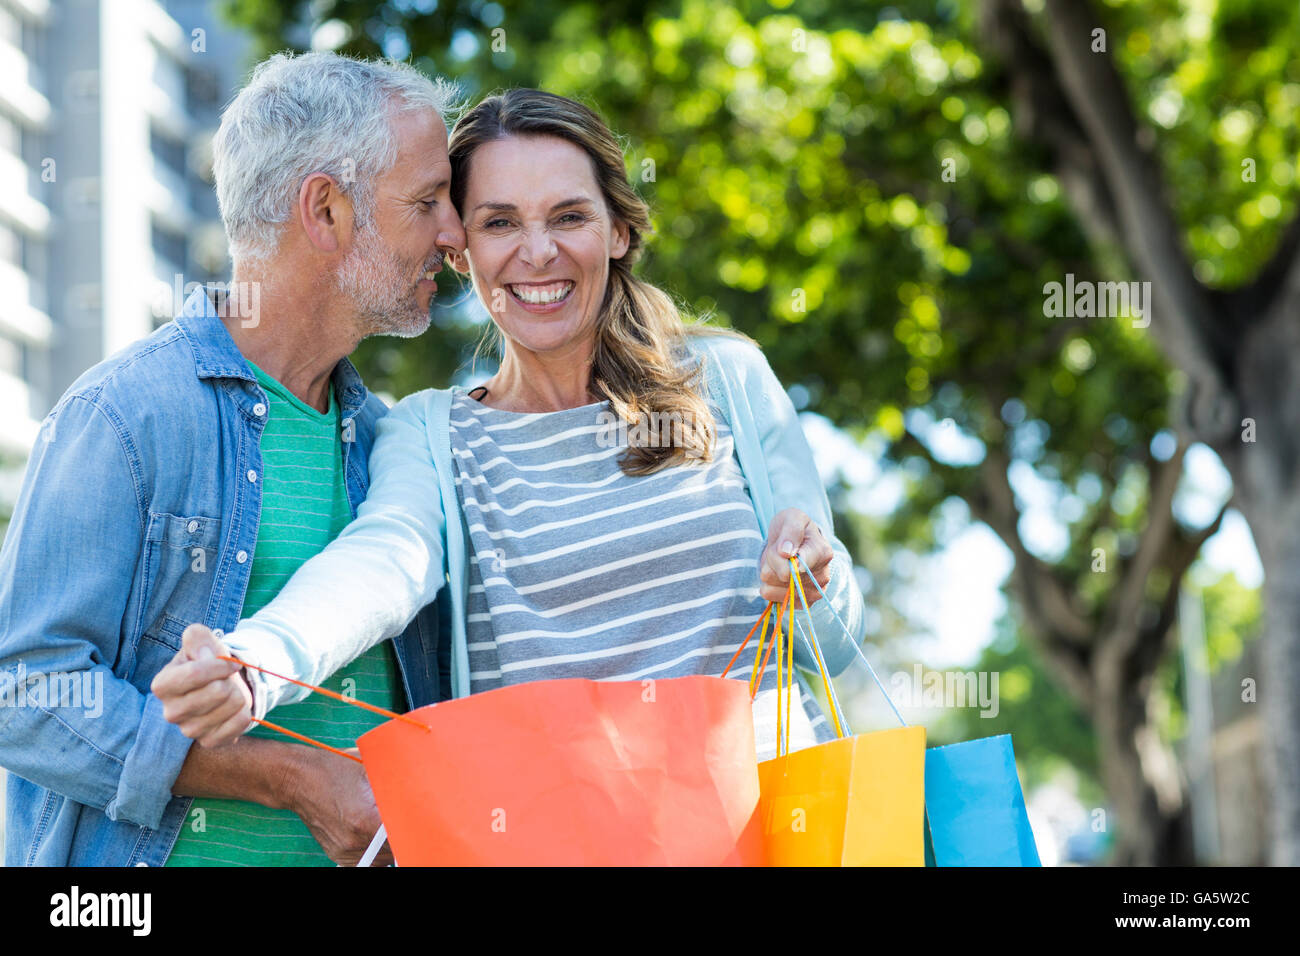 Romantic couple holding shopping bags in city Stock Photo